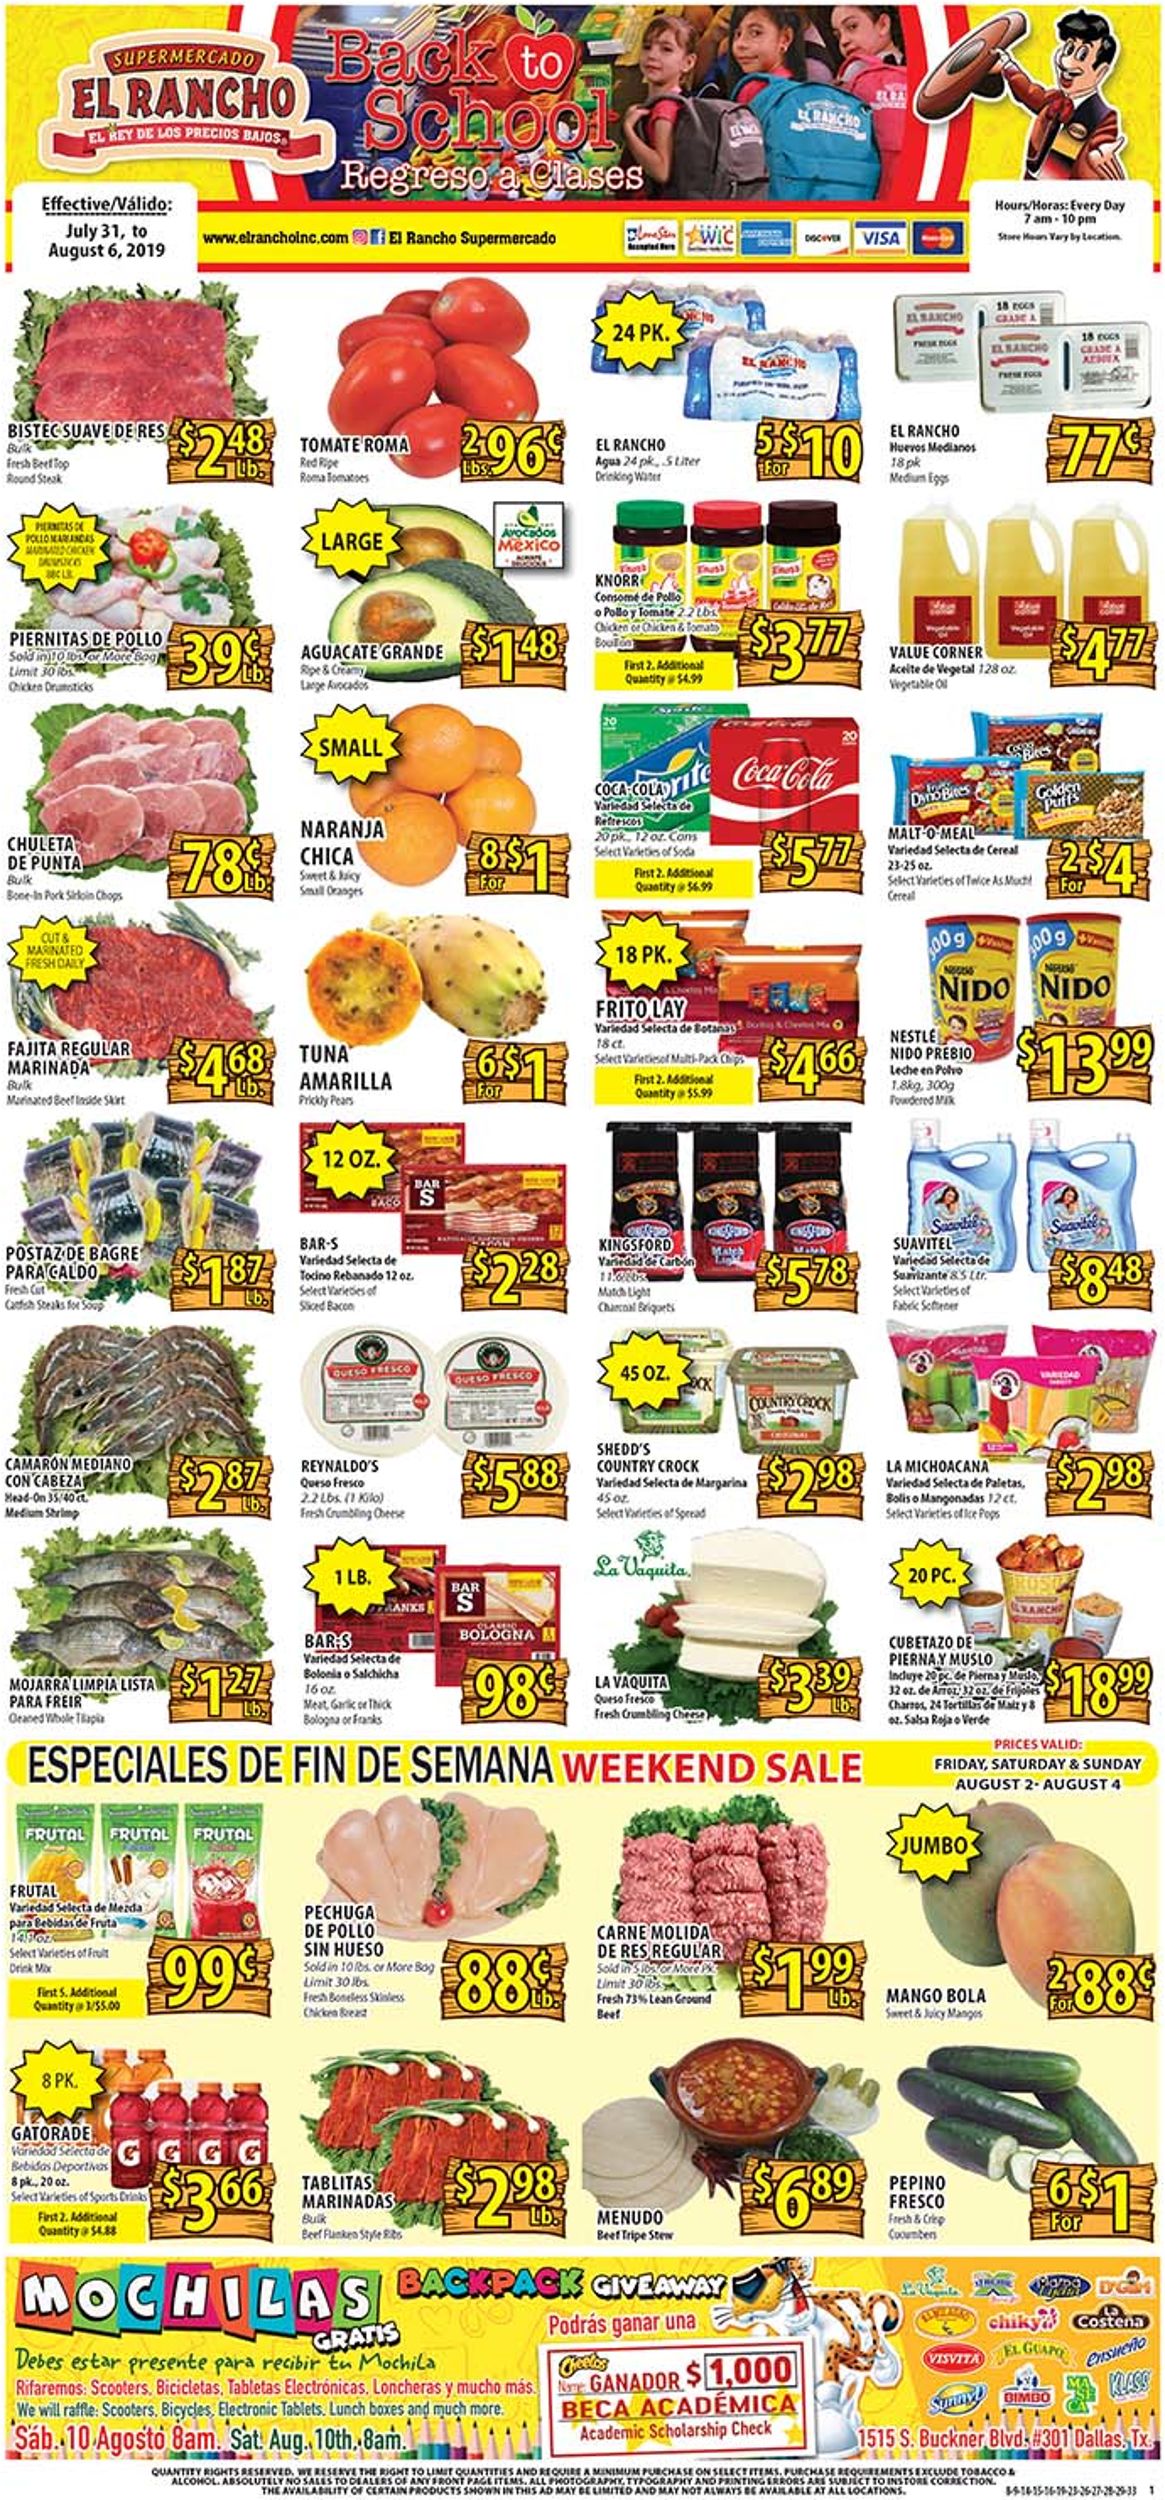 El Rancho Current weekly ad 07/31 - 08/06/2019 - frequent-ads.com